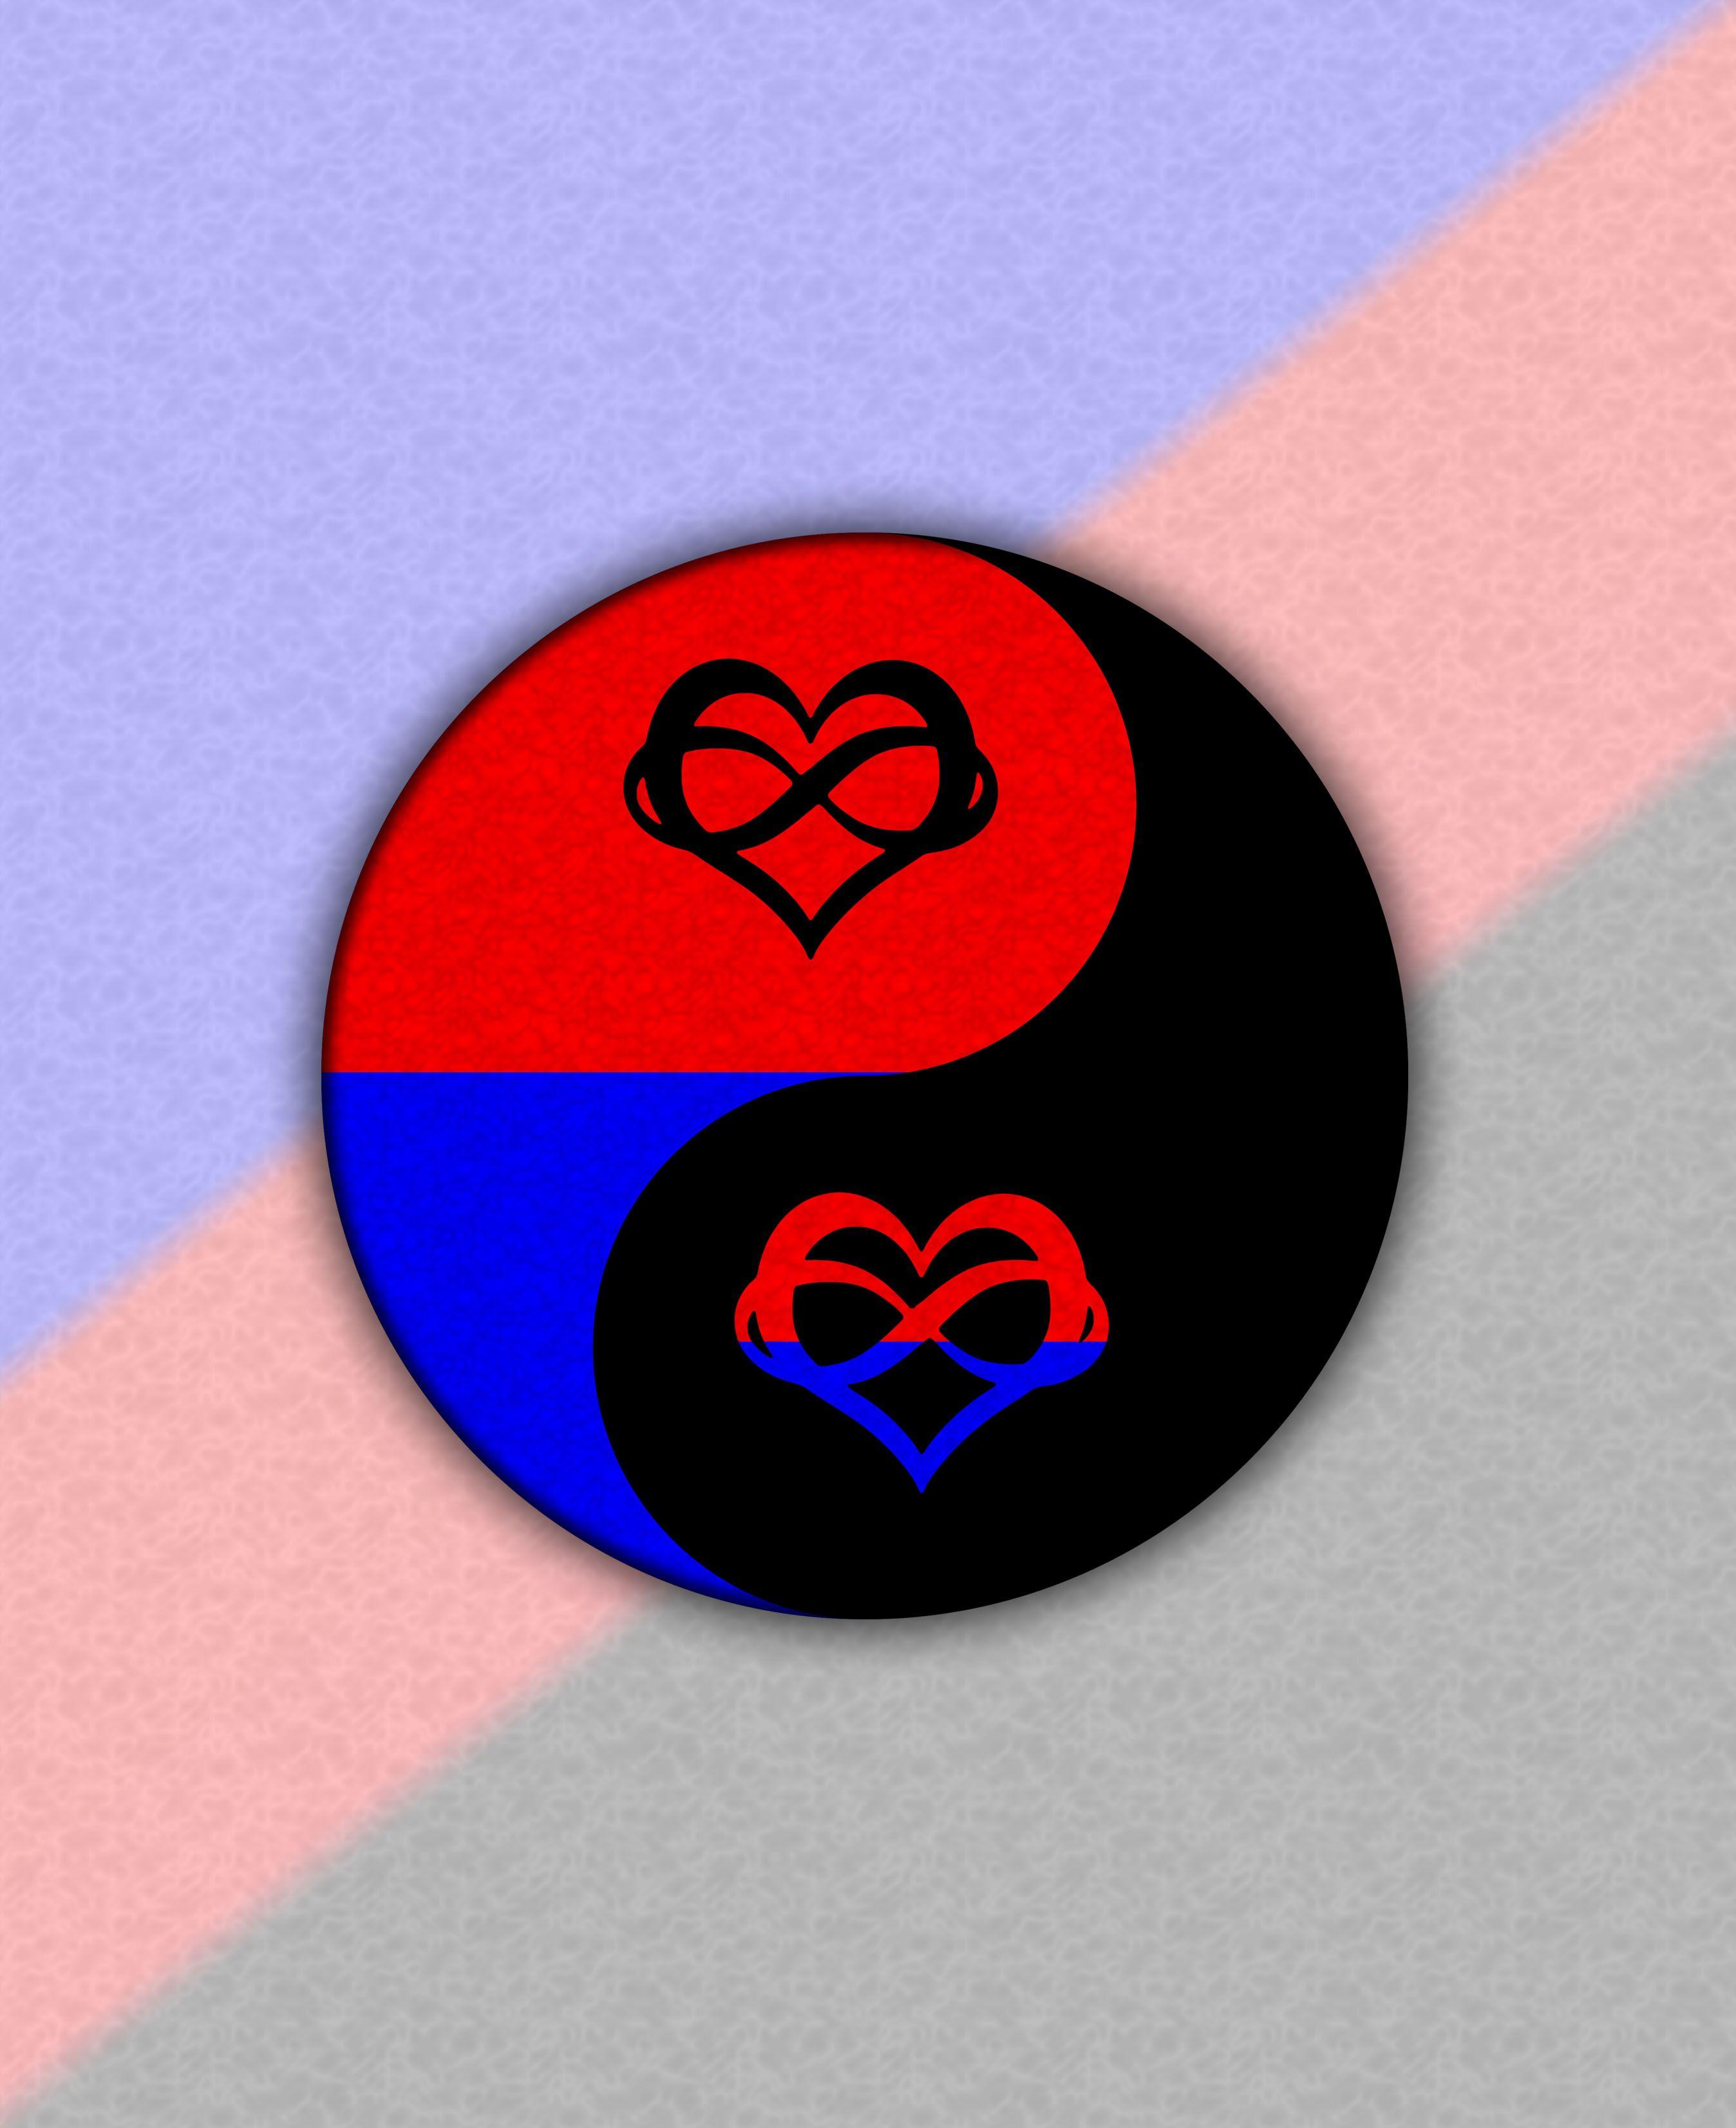 Polyamorous pride Yin and Yang with infinity heart symbols. Blue